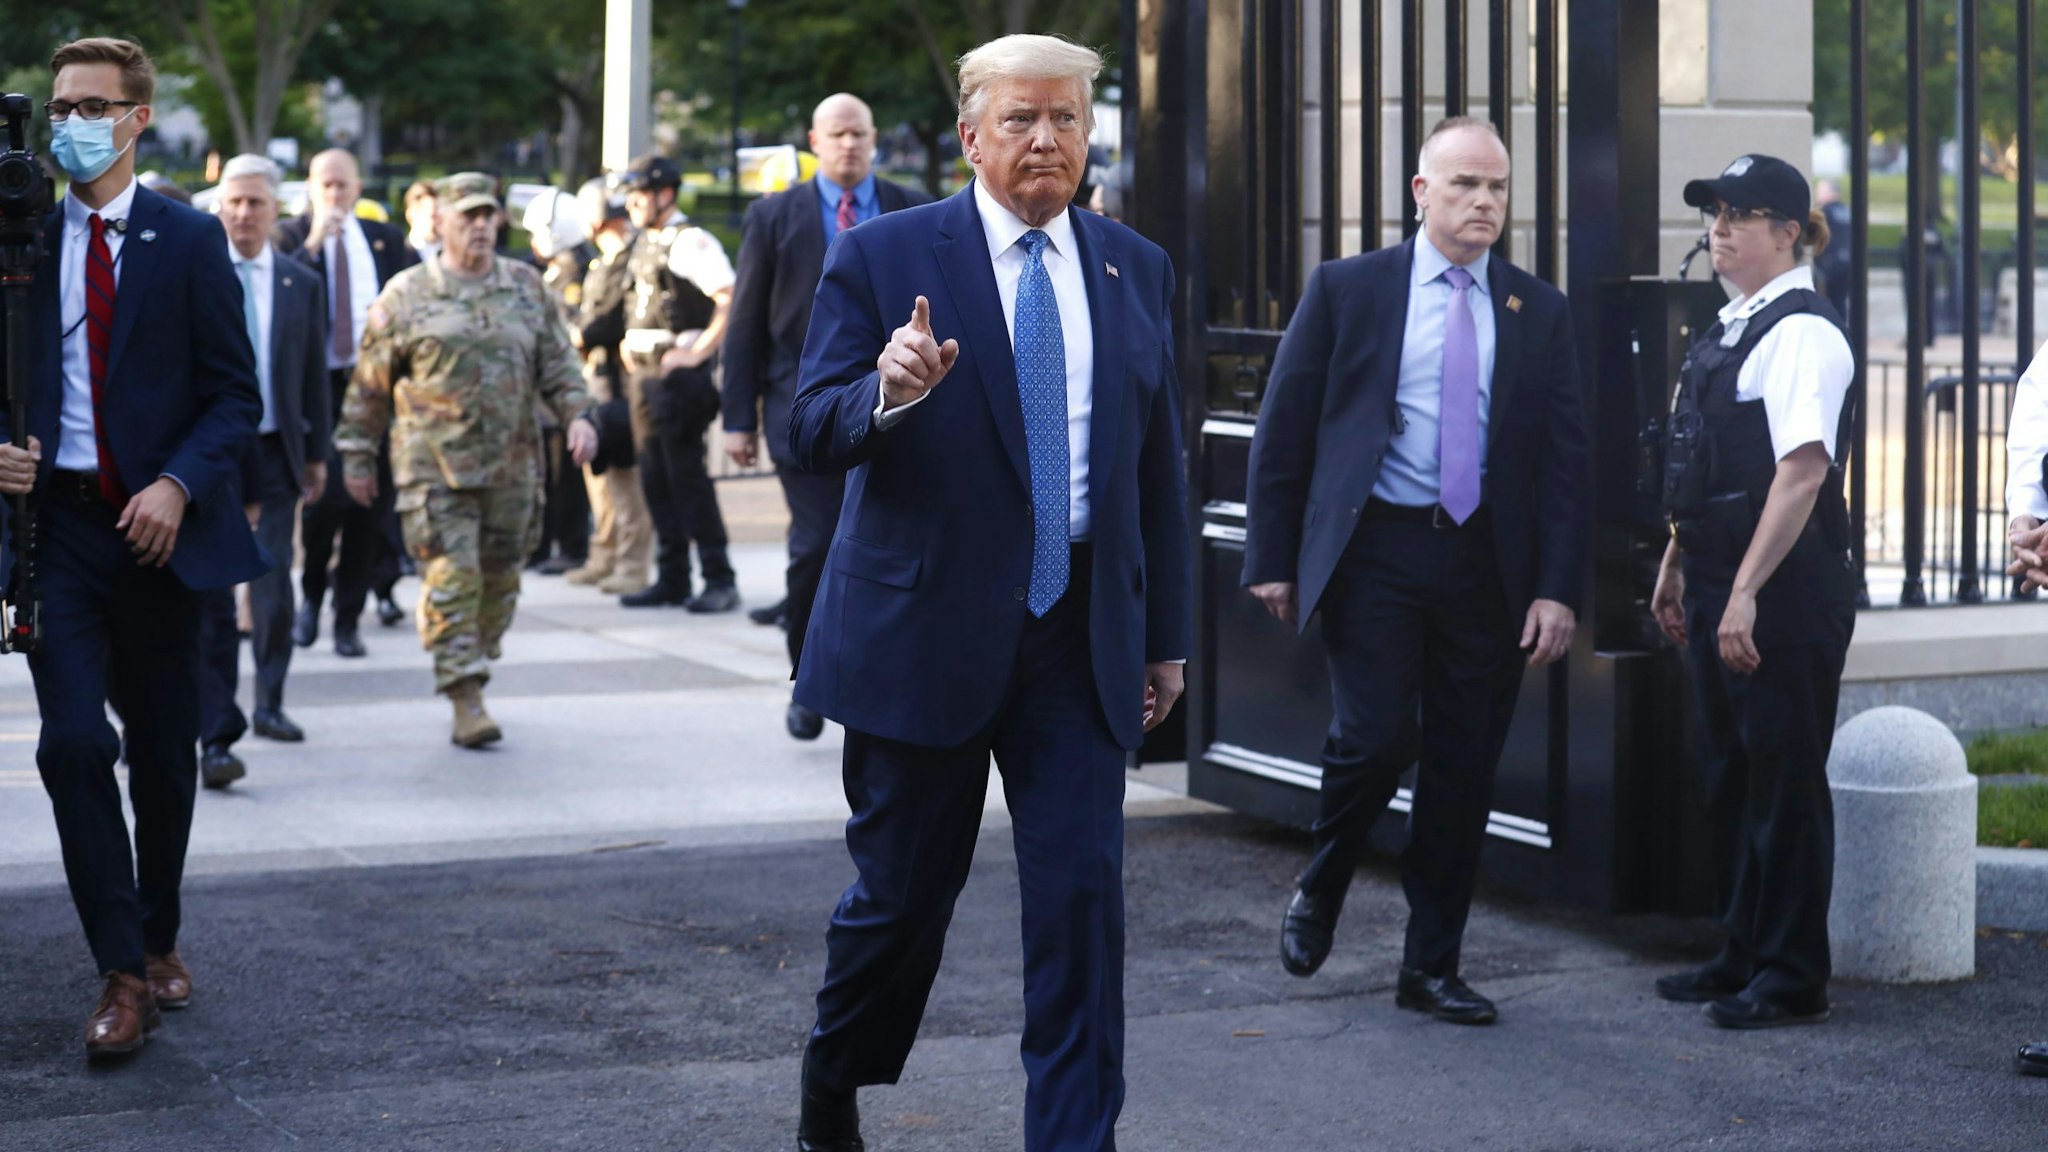 U.S. President Donald Trump returns to the White House after posing with a bible outside St. John's Episcopal Church in Washington, D.C., U.S., on Monday, June 1, 2020. Trump promised a forceful response to violent protests across the country before leaving the White House to visit a church across the street that had been been damaged by fires.